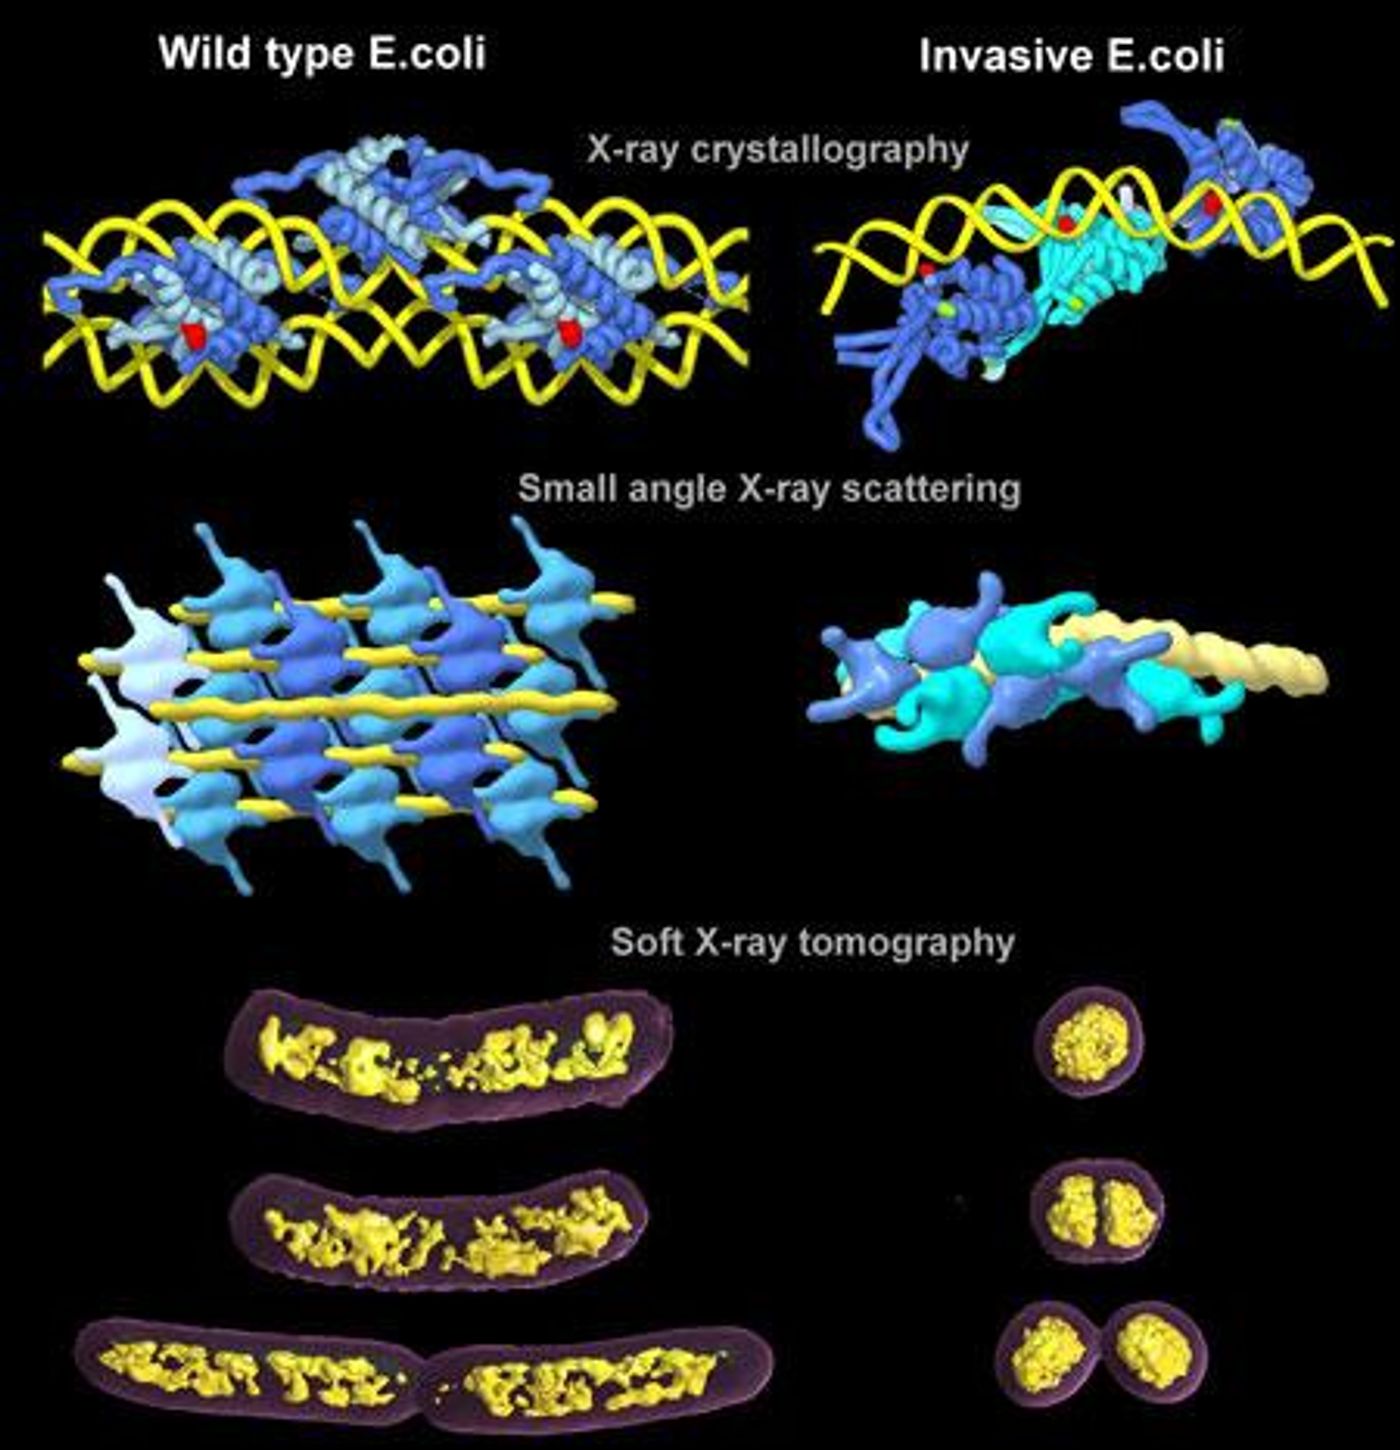 The top two rows show illustrations of crystals and solution structures of bacterial HU proteins with DNA represented by X-ray crystallography and small angle X-ray scattering, respectively. DNA strands are yellow and HU proteins are shades of blue. Soft X-ray tomography was used to visualize bacterial chromatin (in yellow) in wild type and invasive E. coli cells, shown in the bottom row. / Credit: Michal Hammel/Berkeley Lab